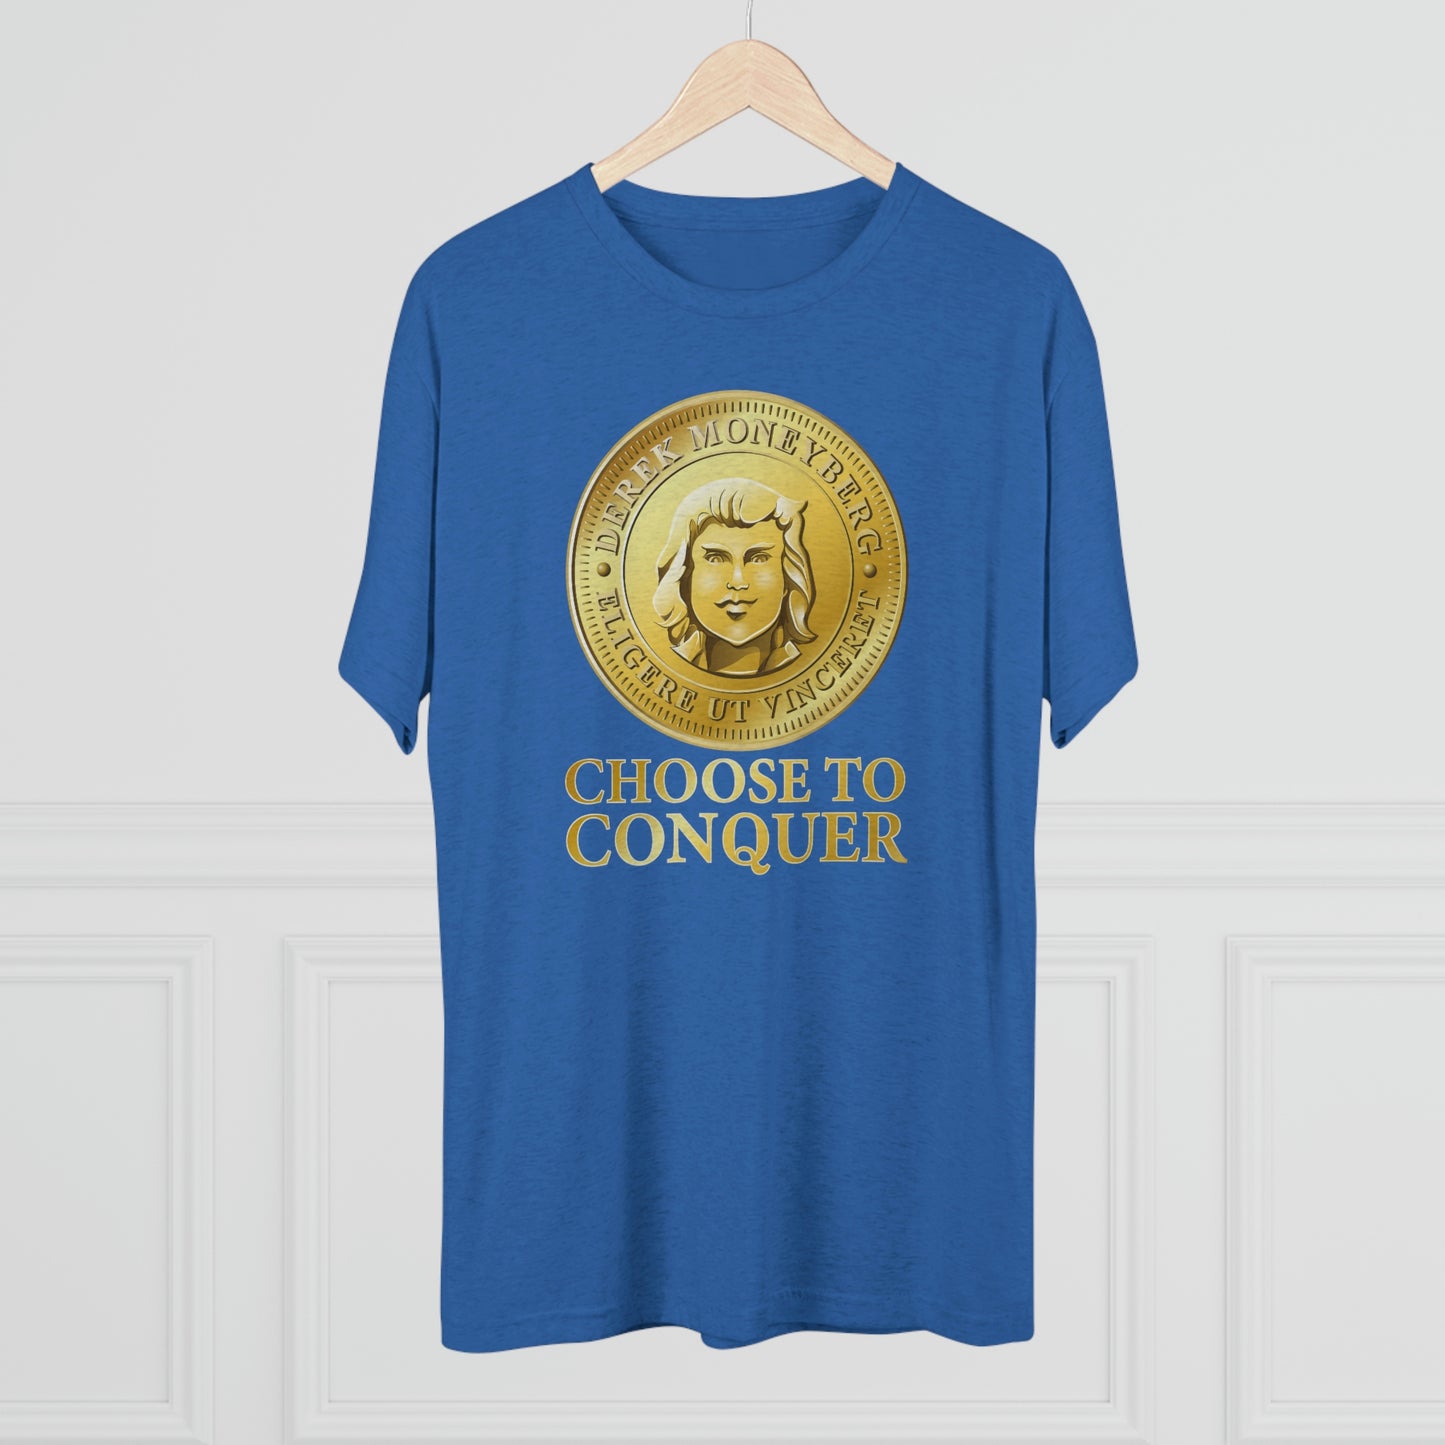 The Choose To Conquer Unisex Tri-Blend Crew T-Shirt